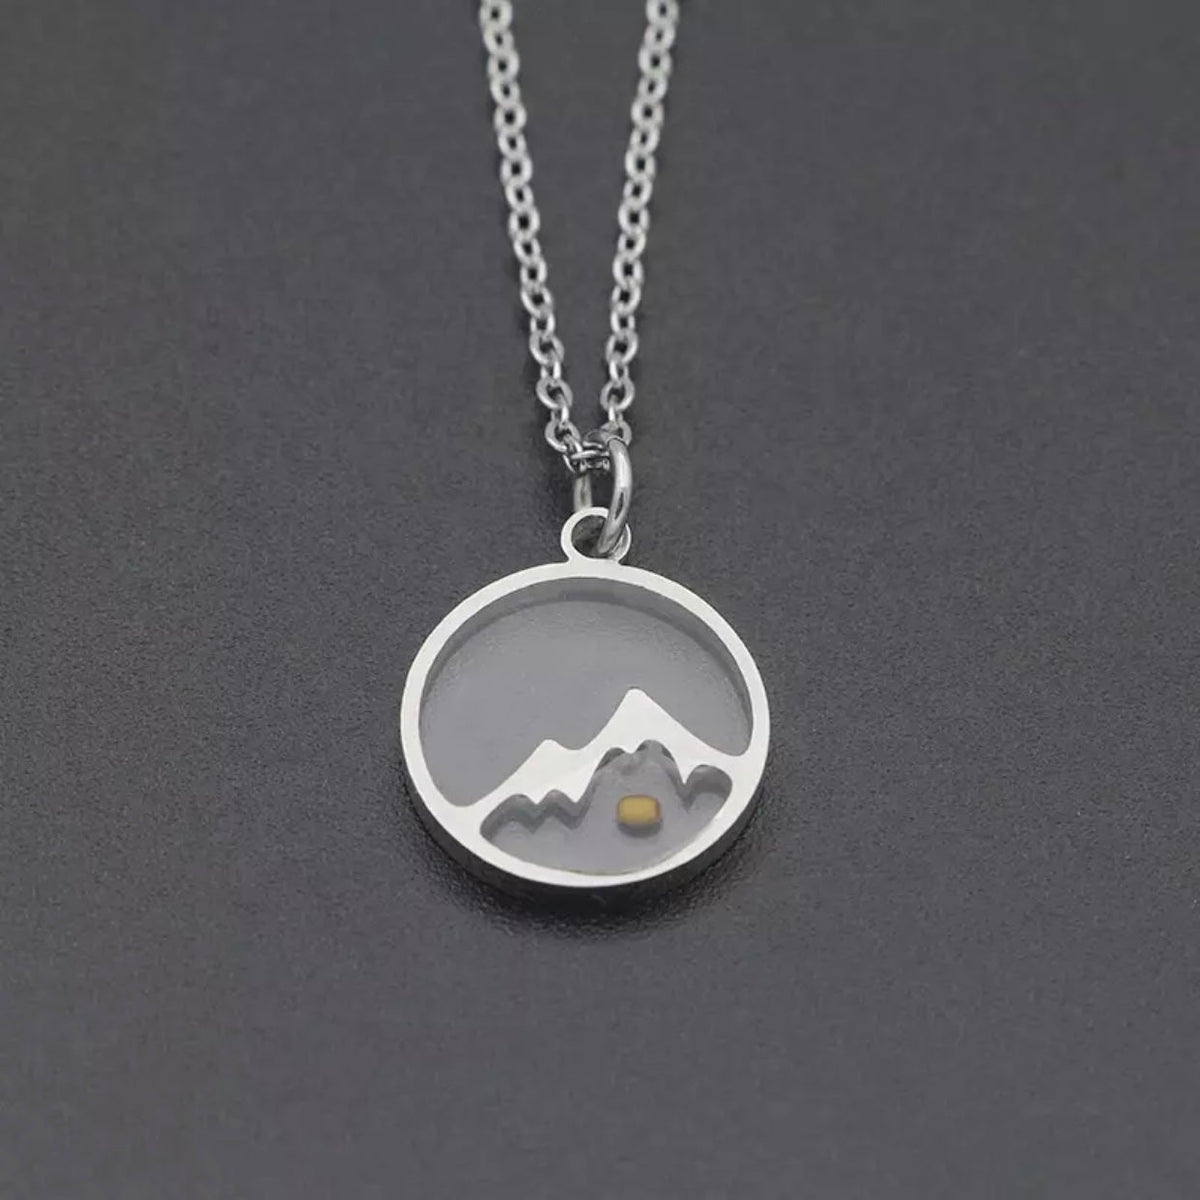 Faith Can Move Mountains, Necklace Jewelry - 